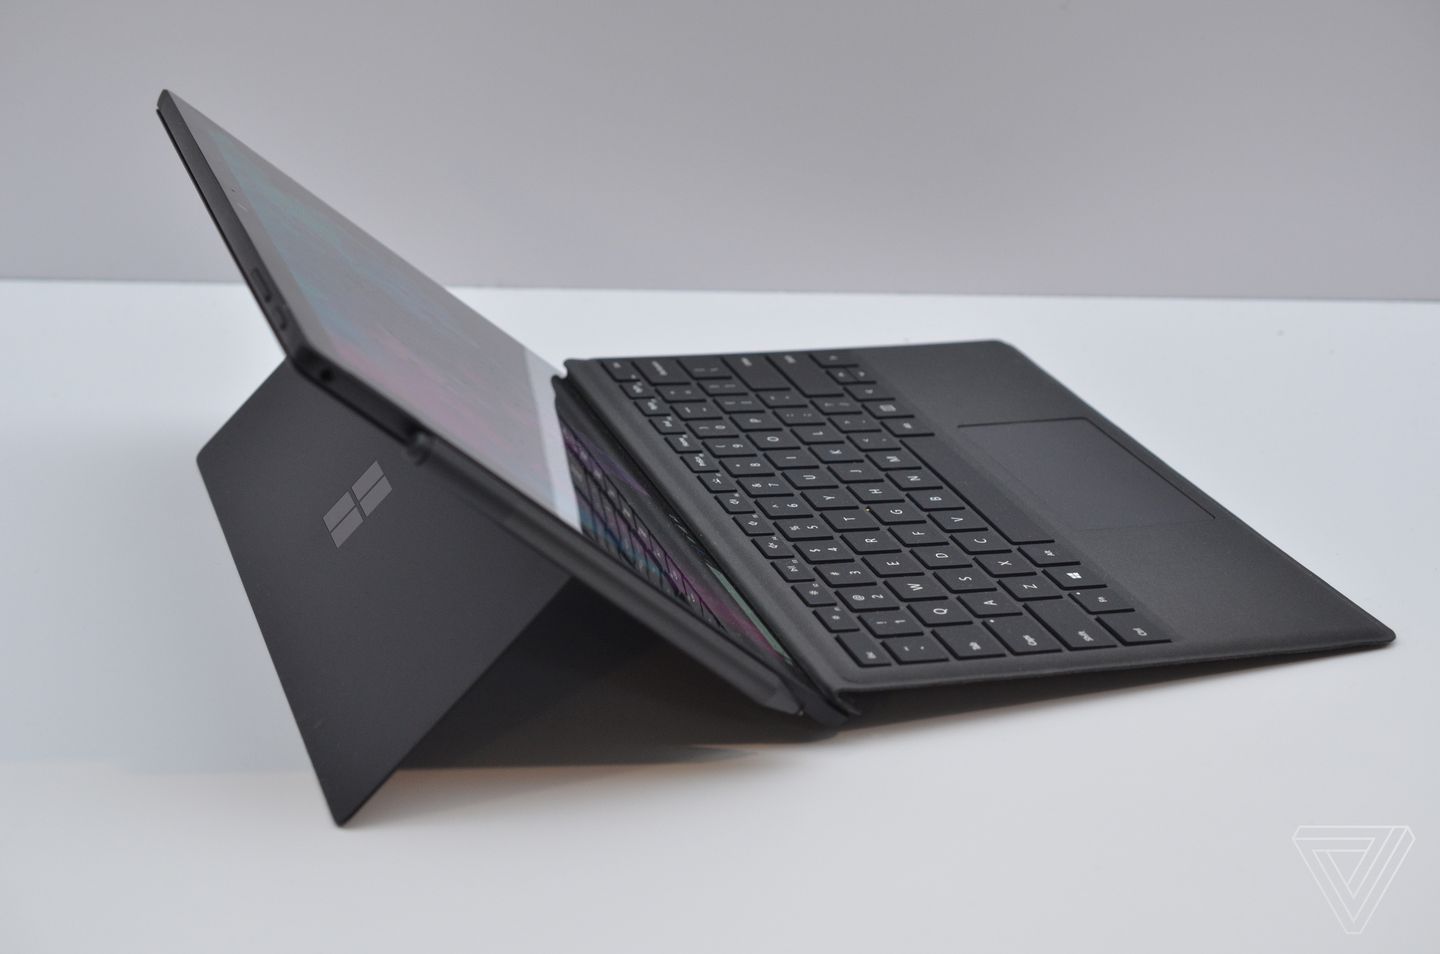 Microsoft Surface Pro 6 in matte black hands-on - The Verge